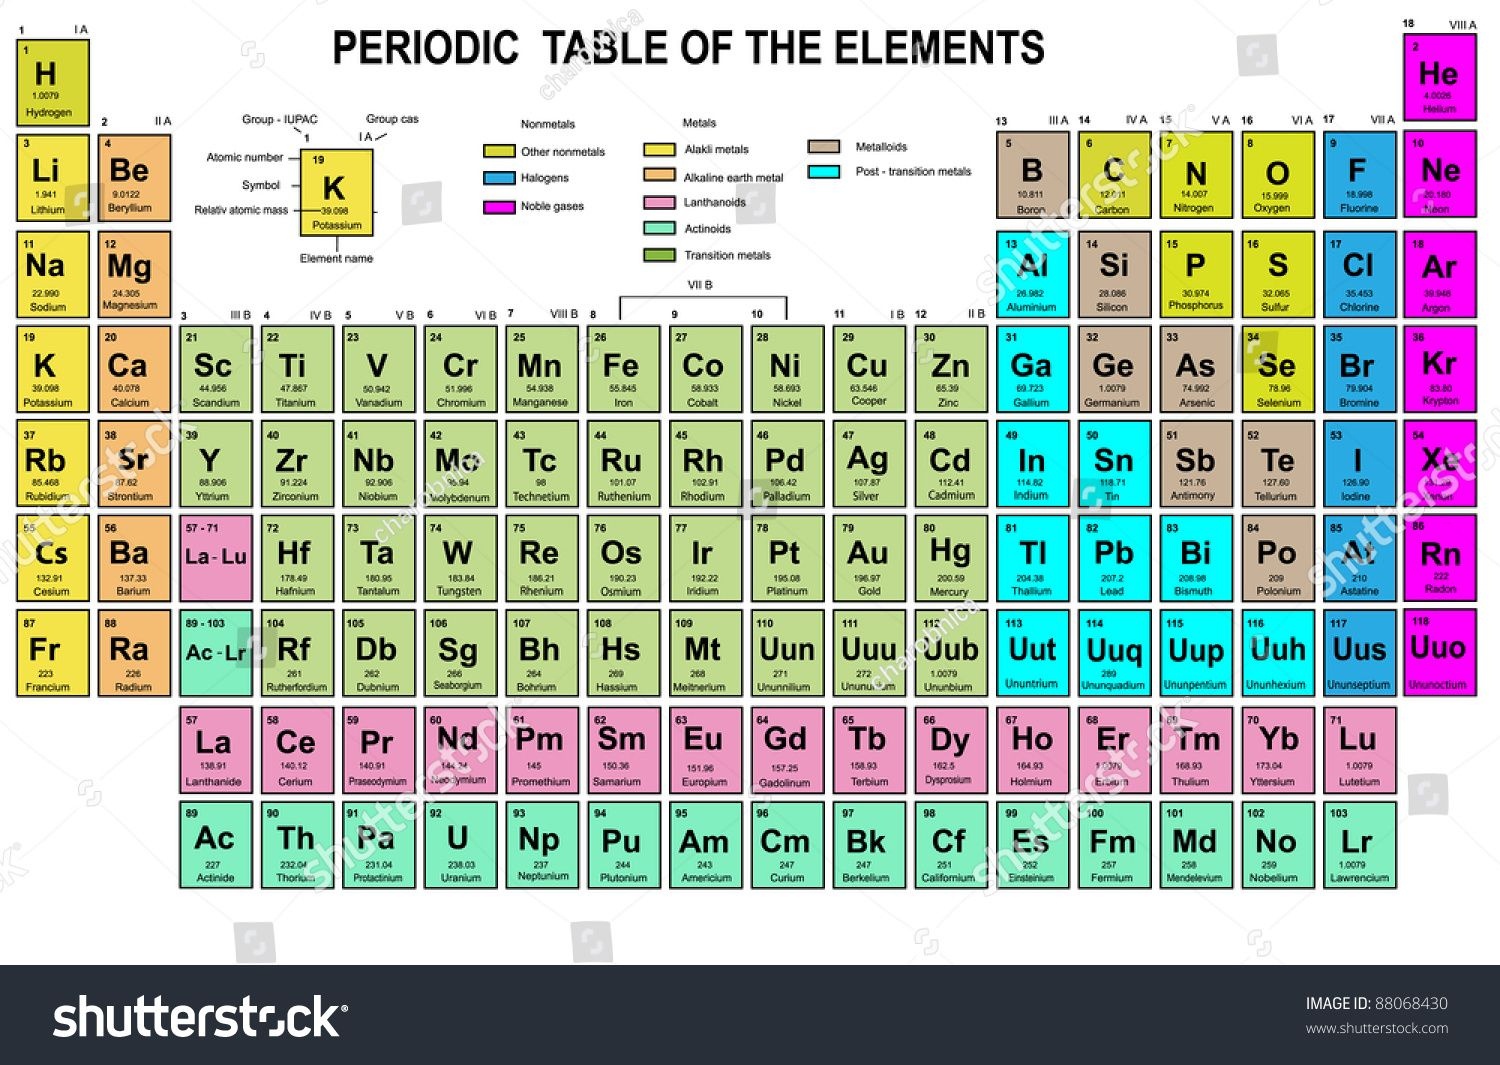 Pintrinh Duong On Physics | Periodic Table Of The Elements - Free Printable Periodic Table Of Elements